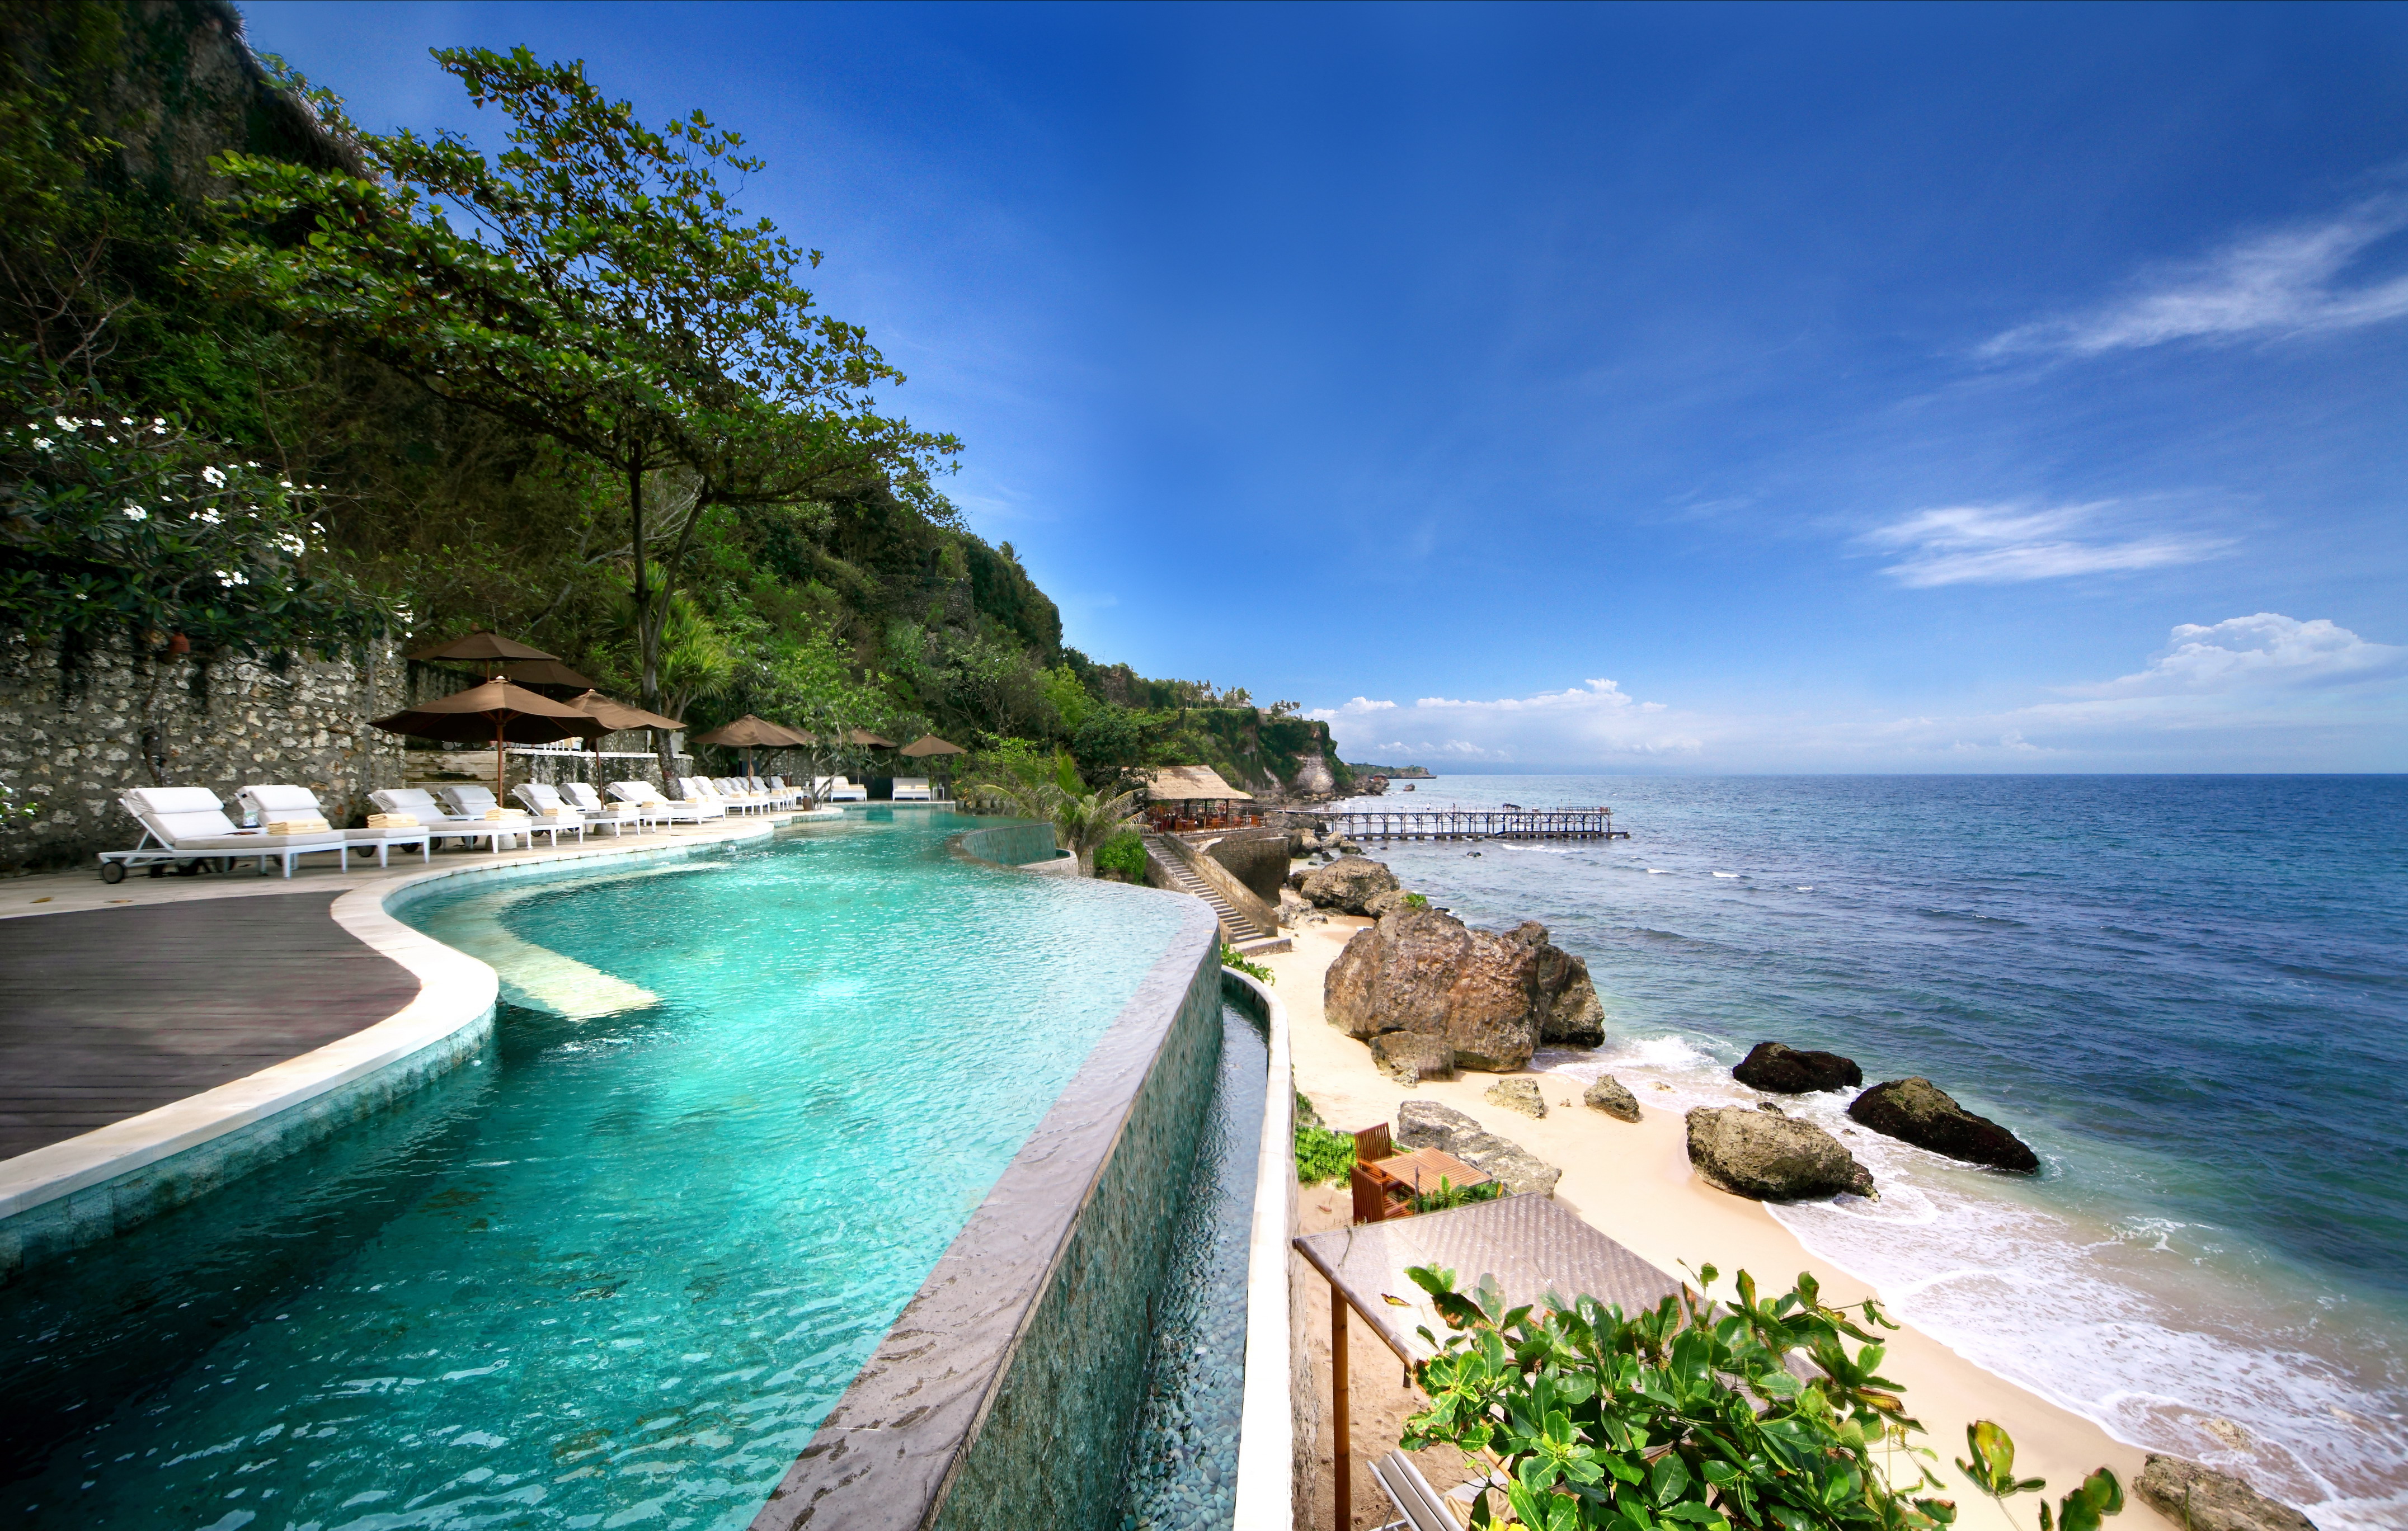 Bali Resorts On The Beach - Ayana Resort And Spa , HD Wallpaper & Backgrounds